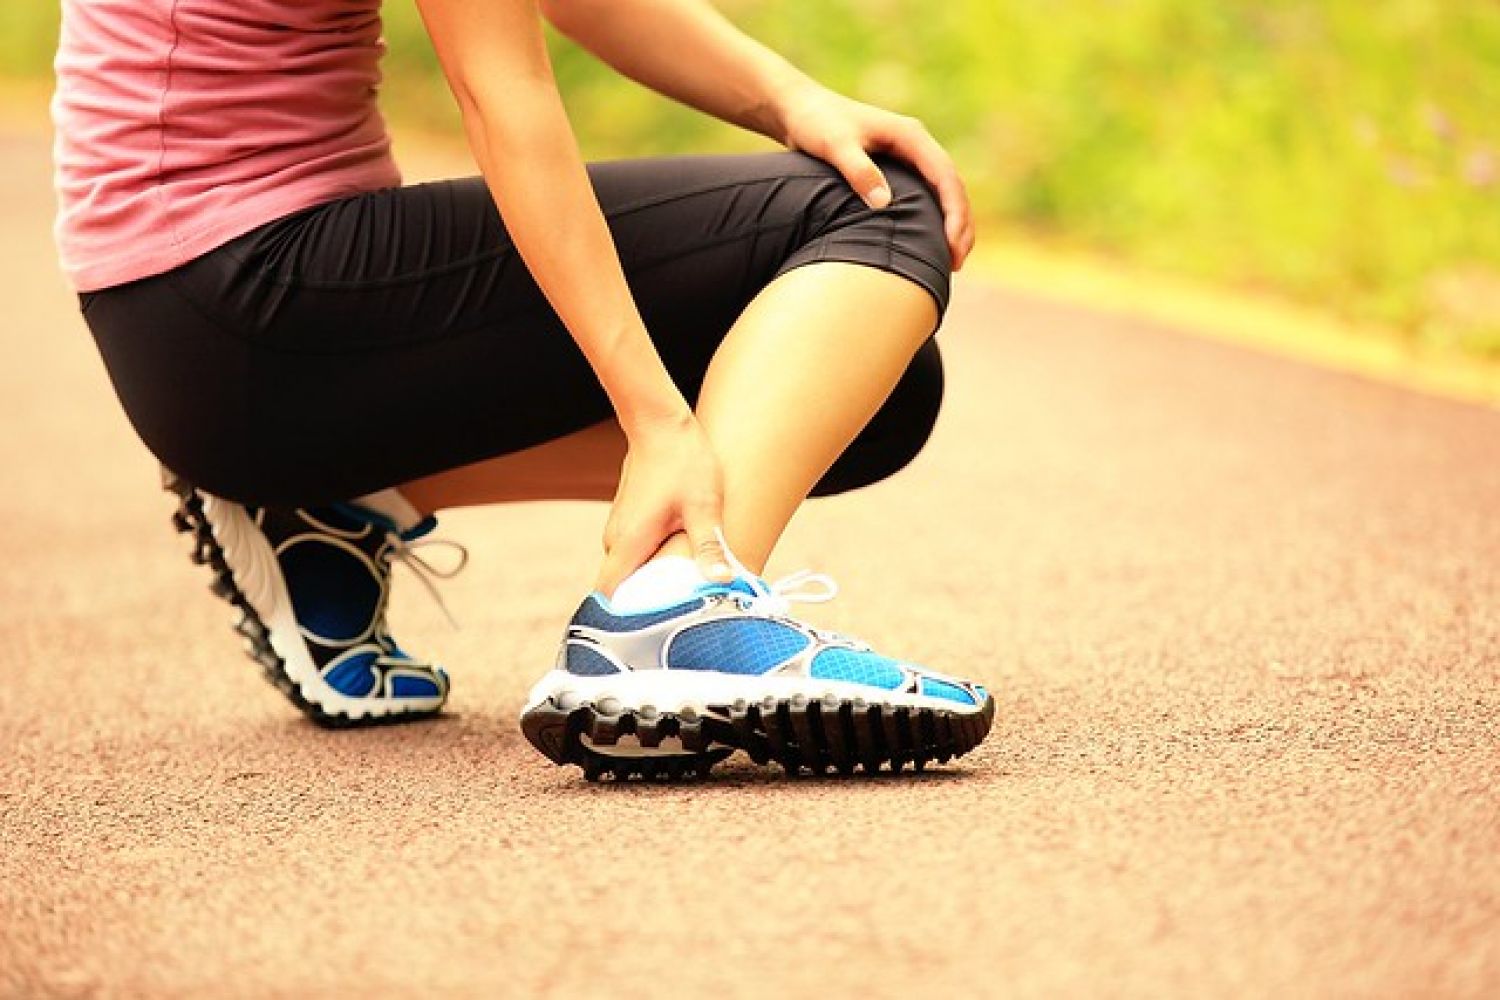 Ankle Sprains - Symptoms, Treatment and Recovery Time image